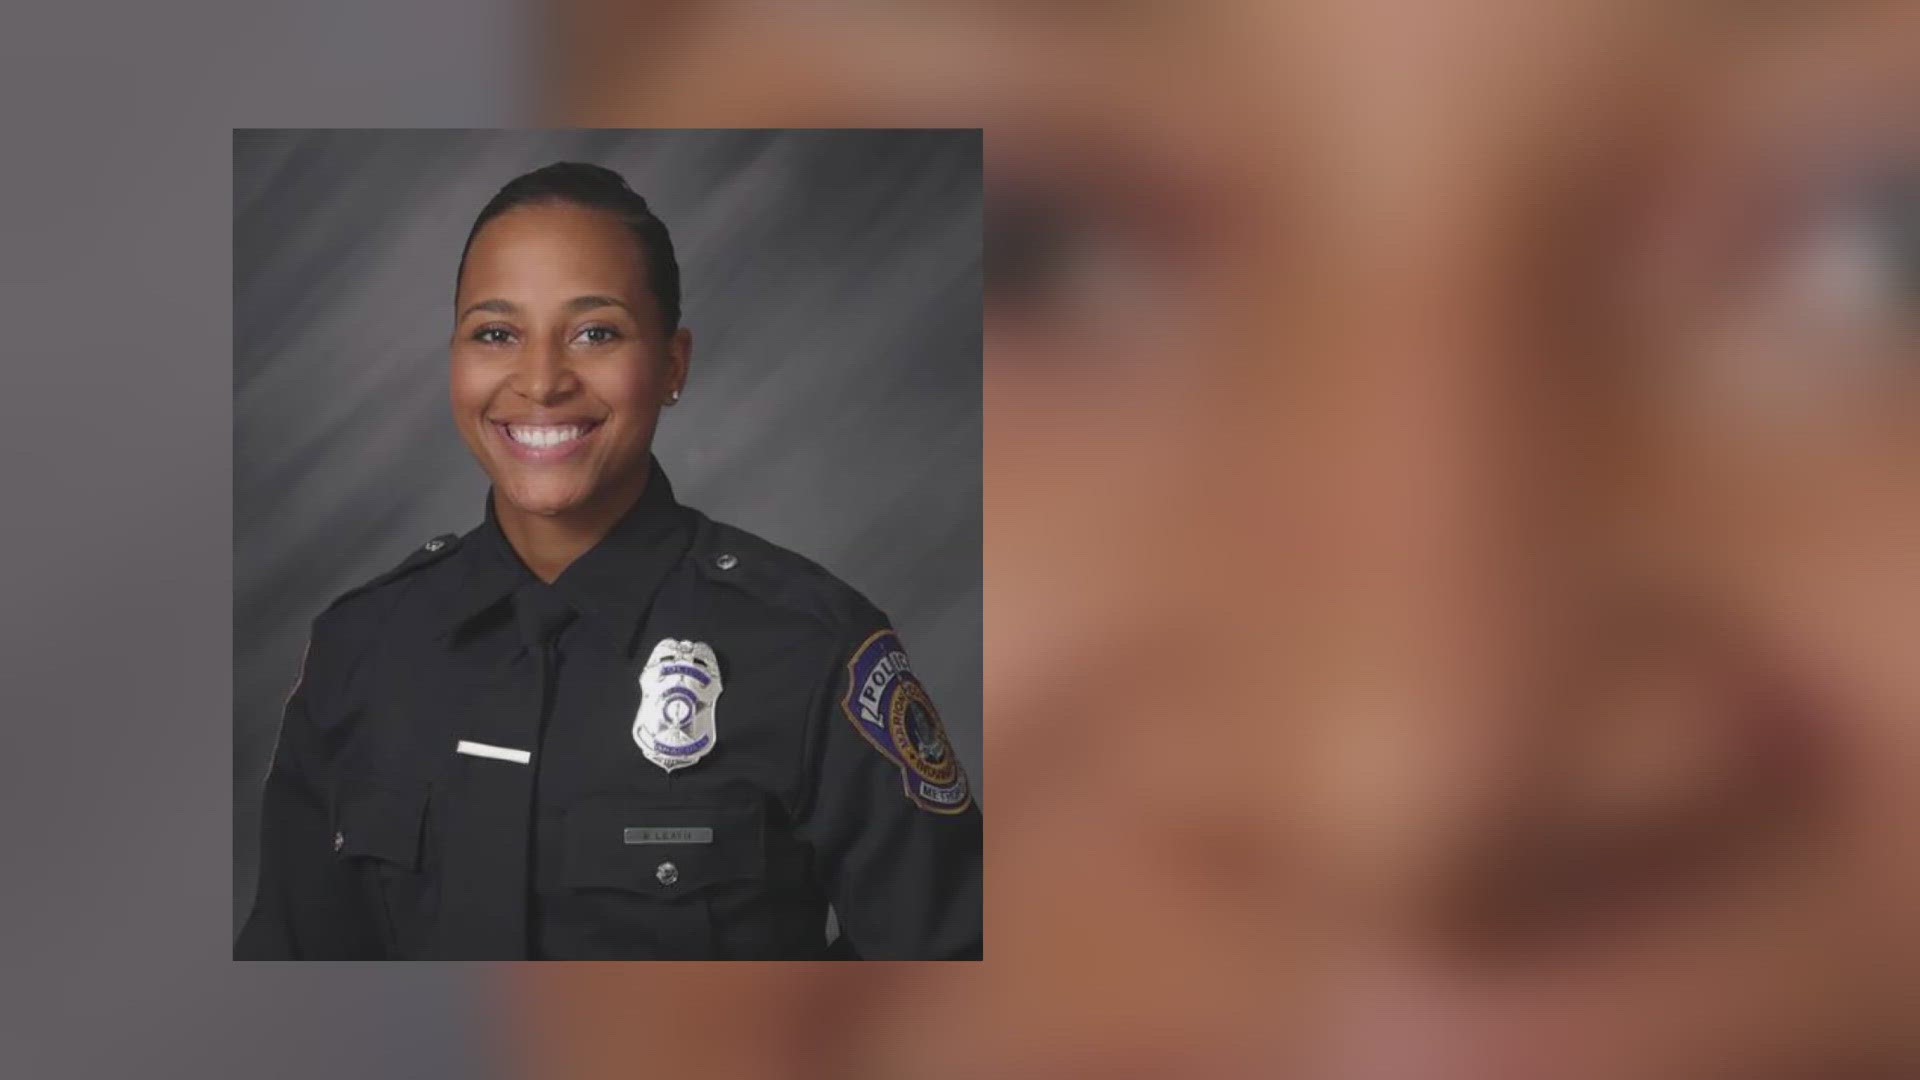 She died in the line of duty nearly three years ago while responding to a domestic violence call.